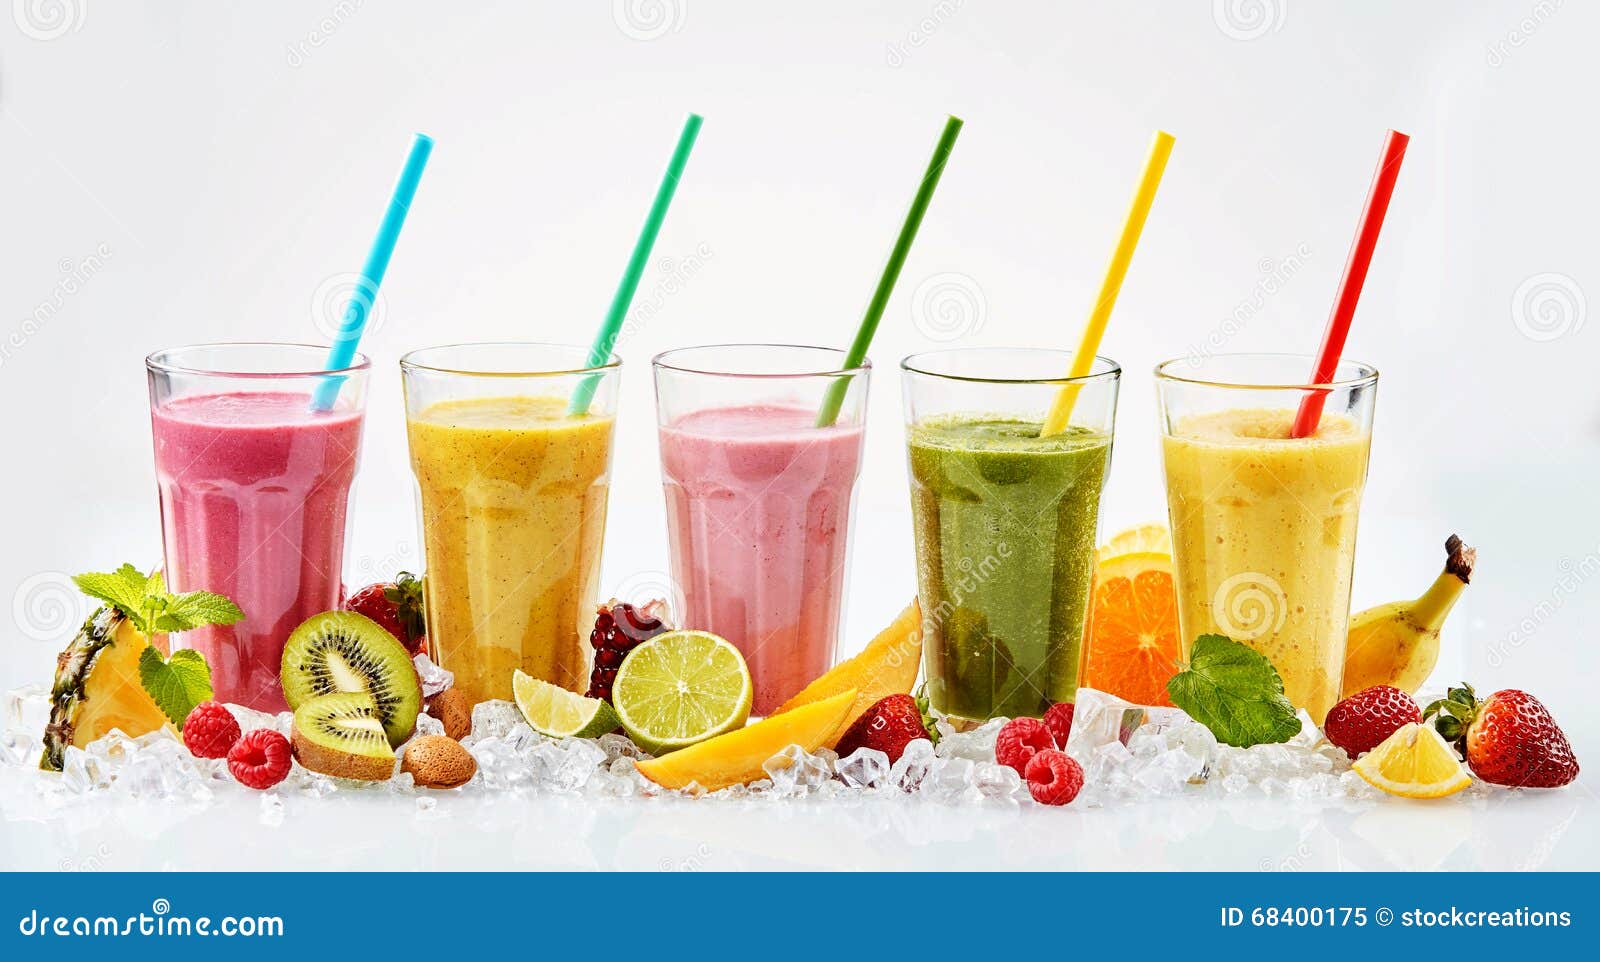 five tall glasses of tropical fruit smoothies stock photo - image